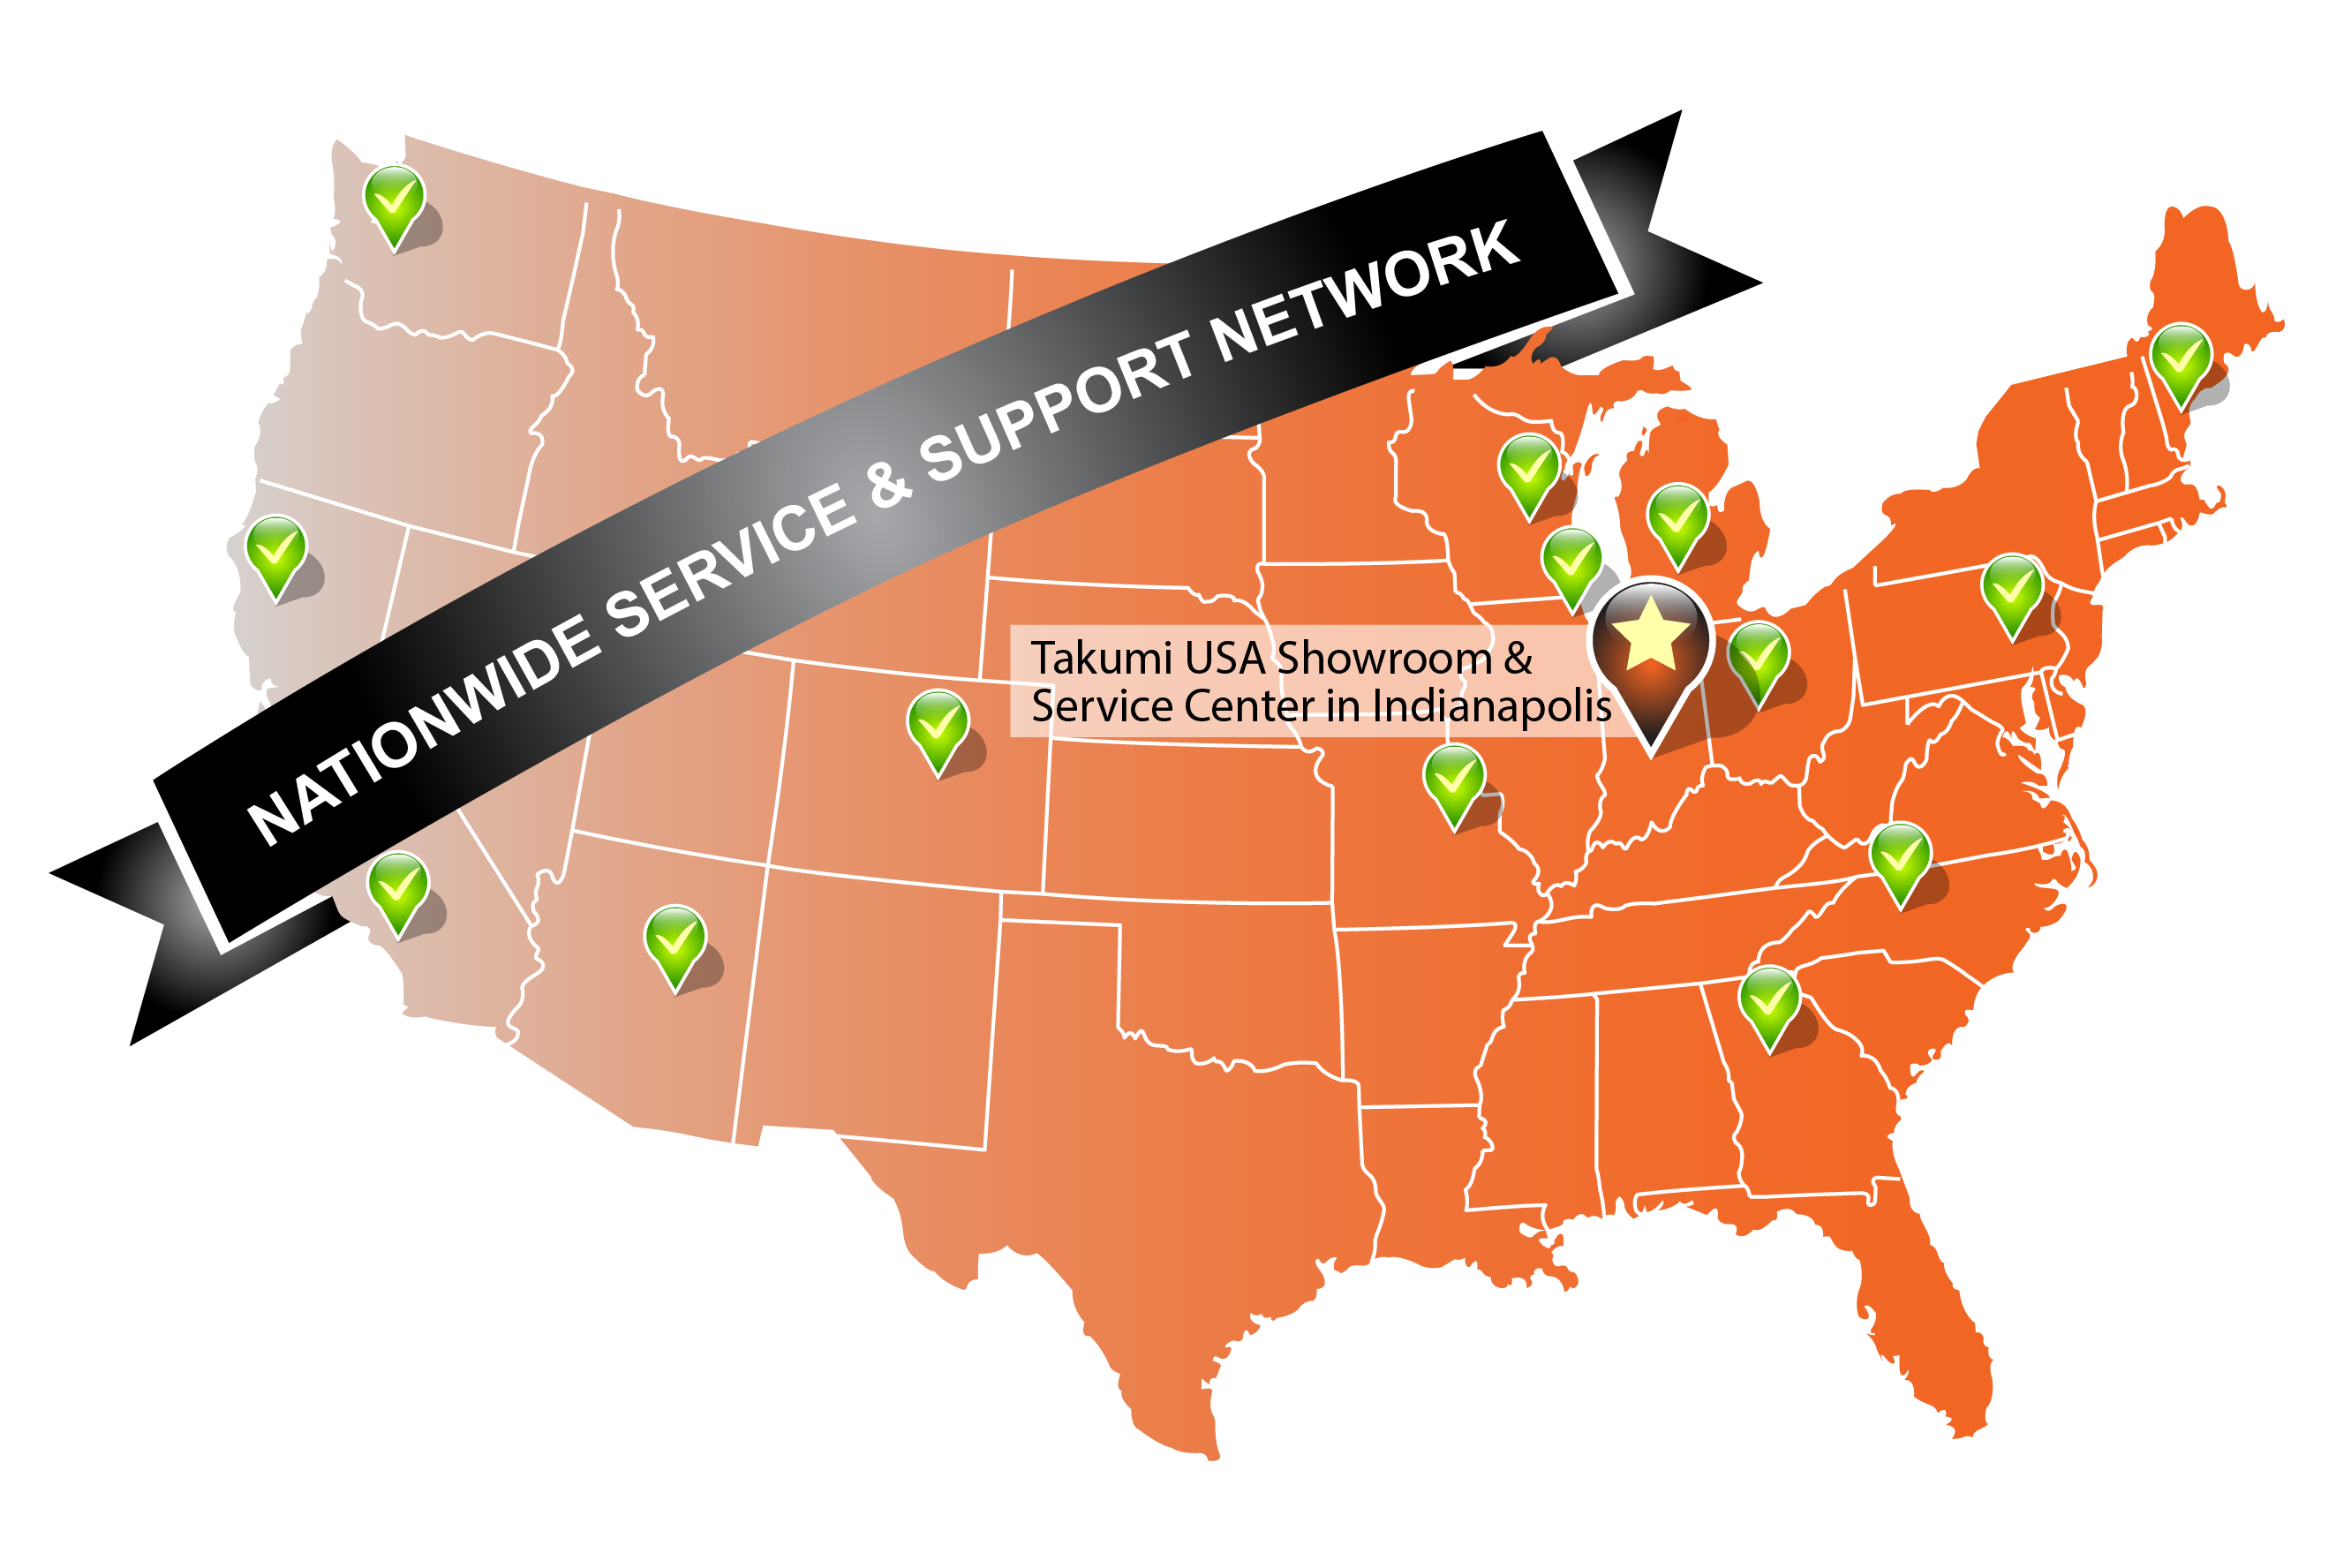 NATIONWIDE SERVICE + SUPPORT NETWORK